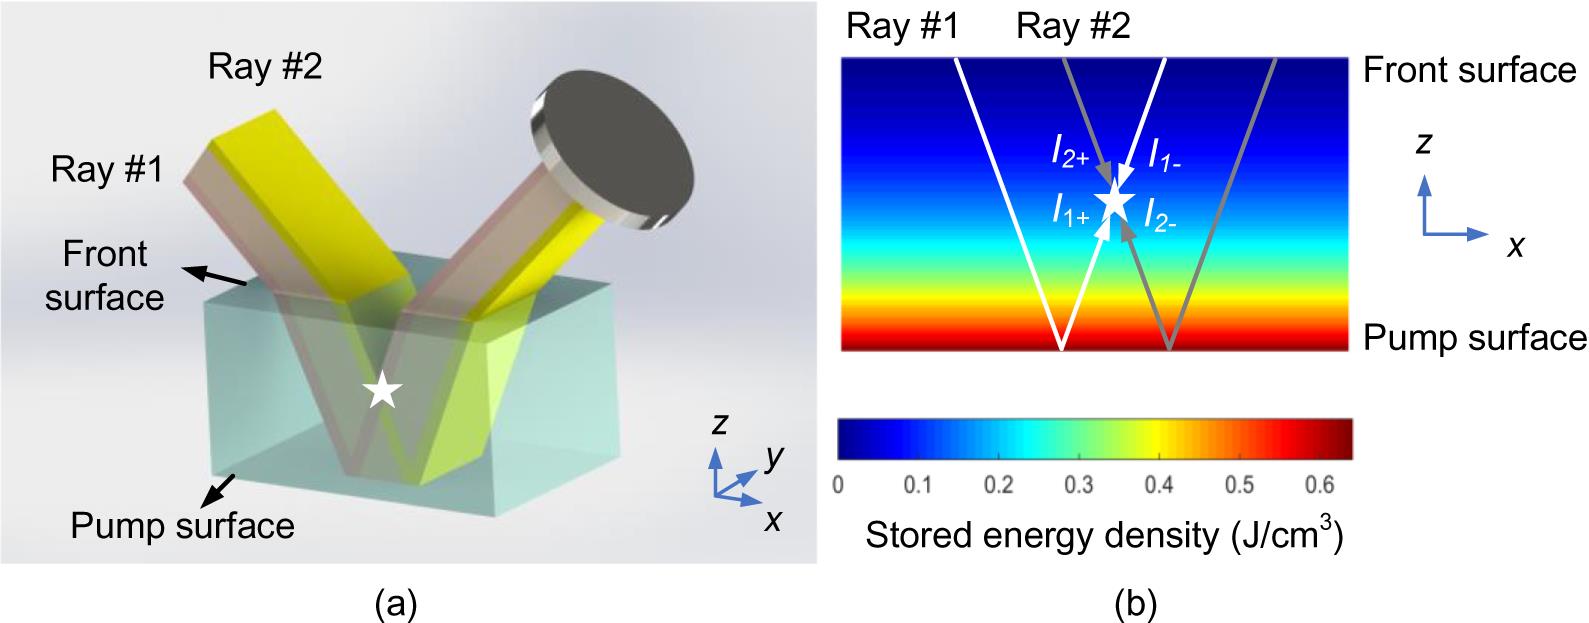 Optical paths in a double-pass laser amplifier with a single AM. (a) Three-dimensional view; (b) two-dimensional view on the xz plane, along with the initial distribution of stored energy density.